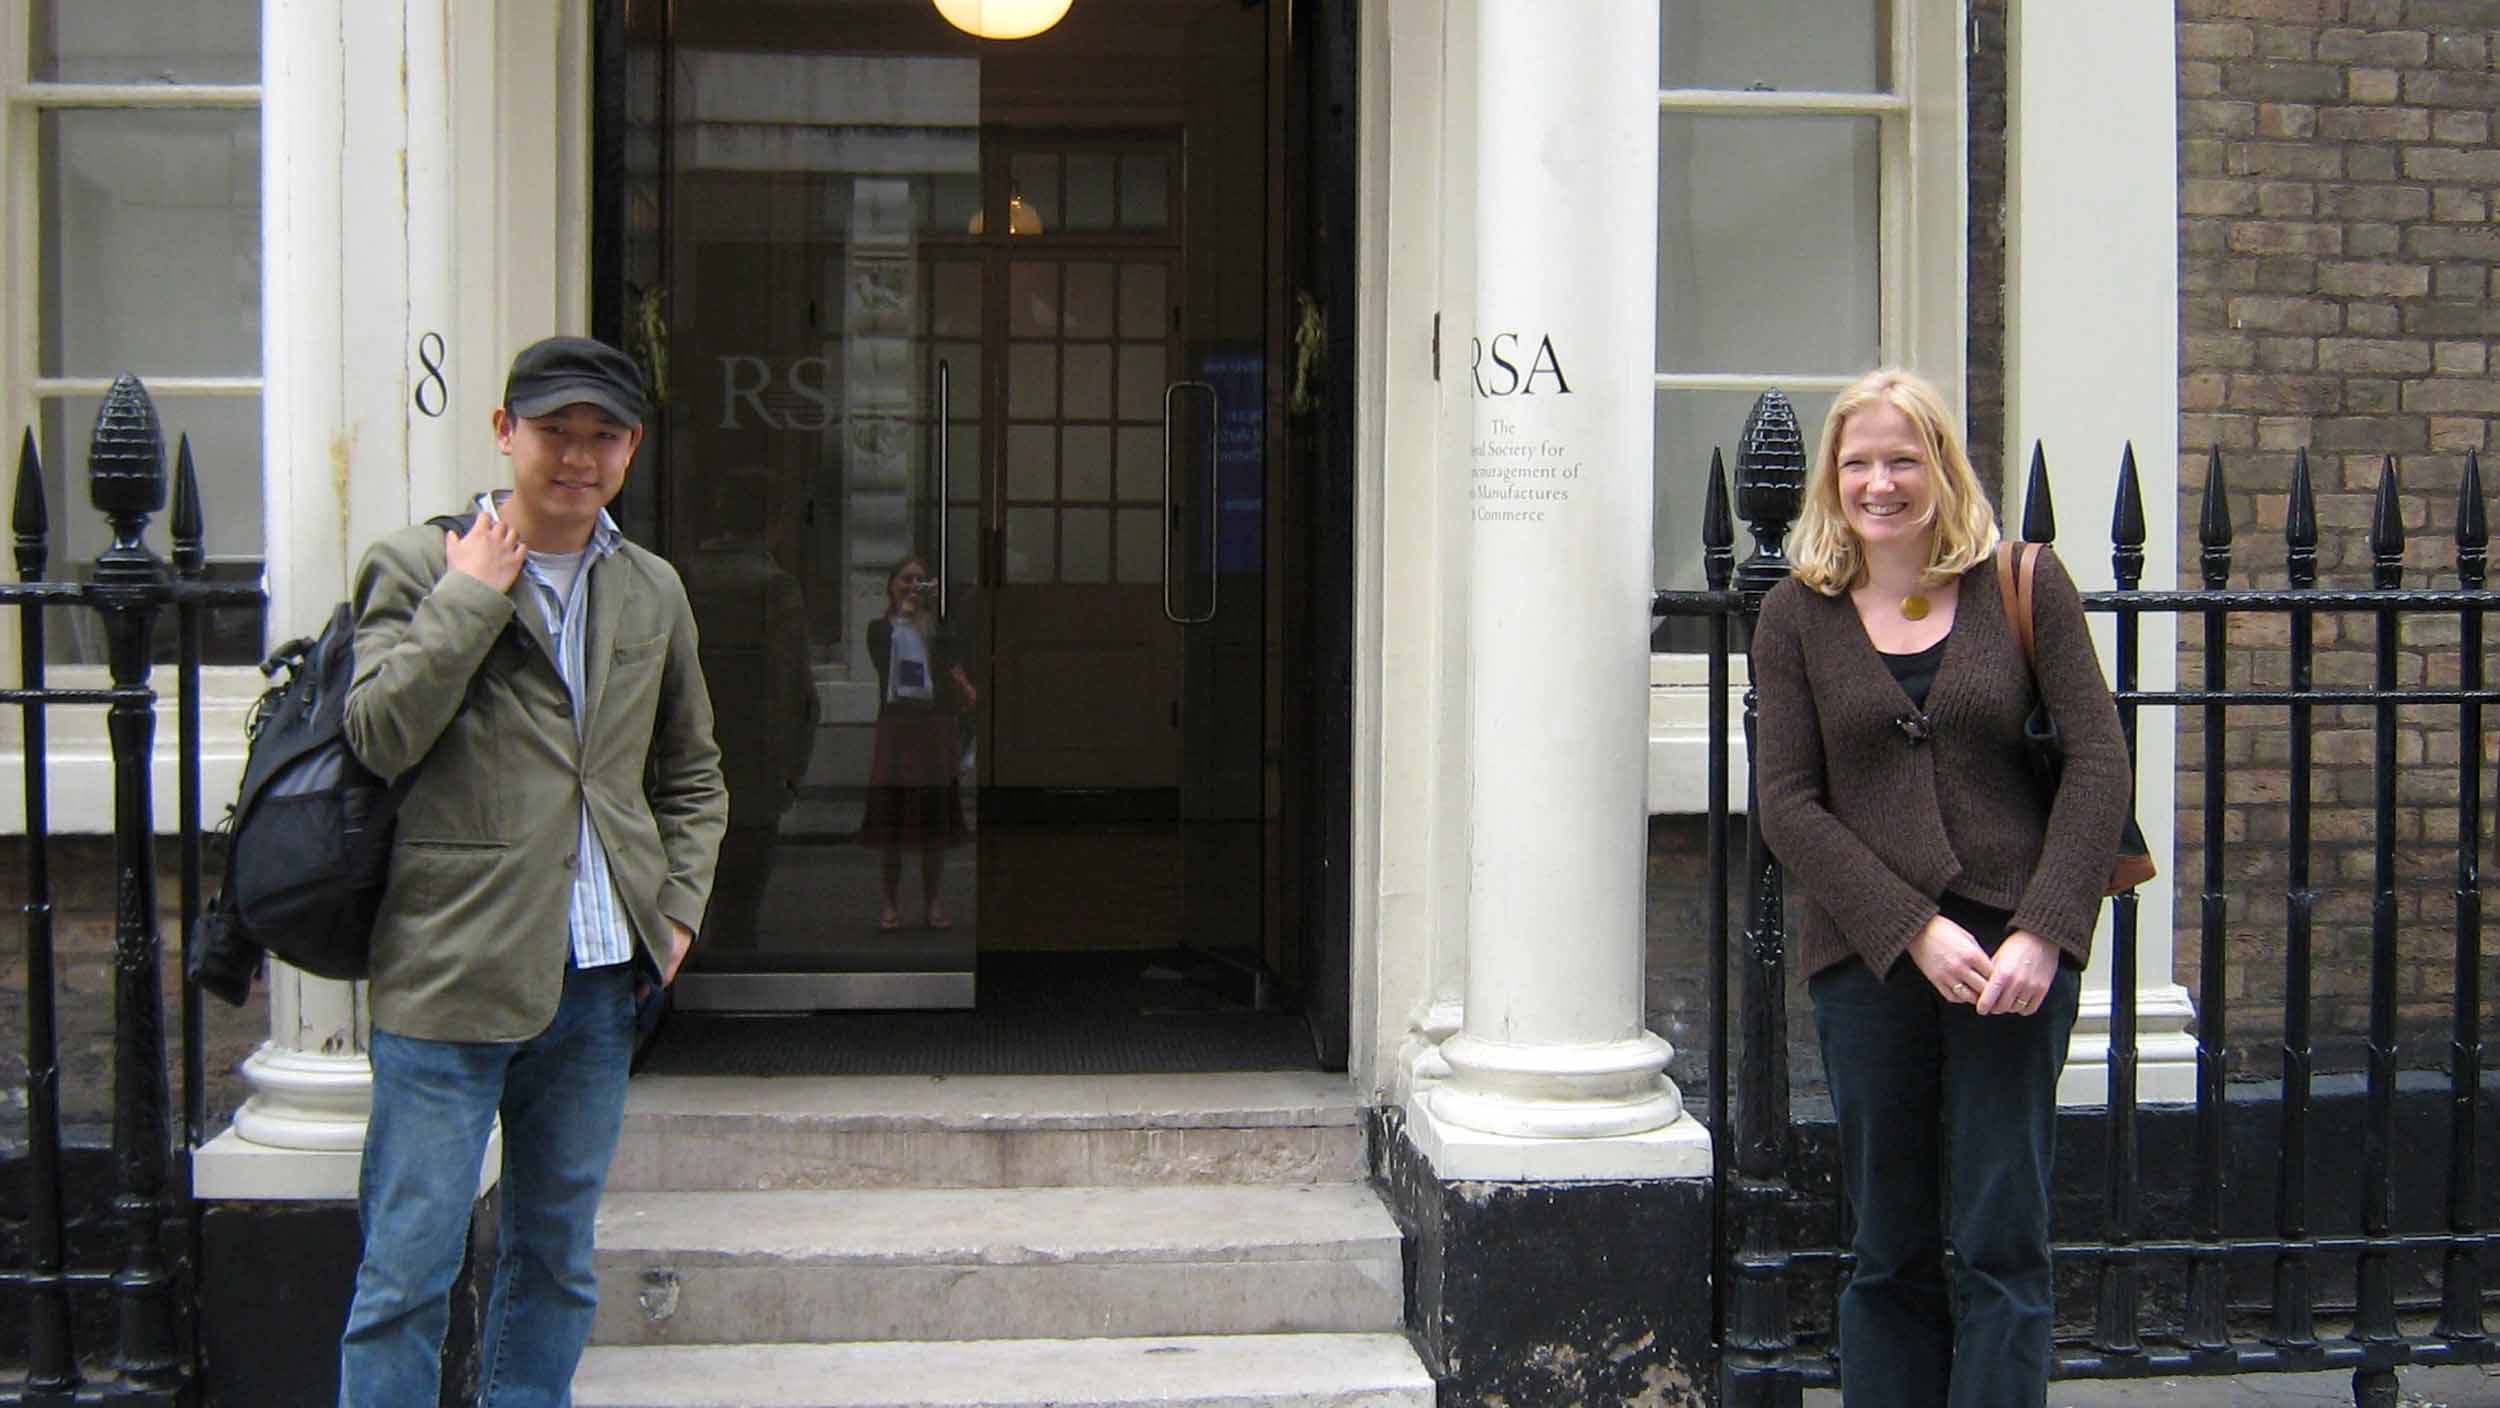 Gary Li, Sharon Messenger (in reflection), and Caroline Overy outside the Royal Society for Arts Library, 2007 Copyright Livingstone Online (Sharon Messenger, photographer). Creative Commons Attribution-NonCommercial 3.0 Unported (https://creativecommons.org/licenses/by-nc/3.0/).